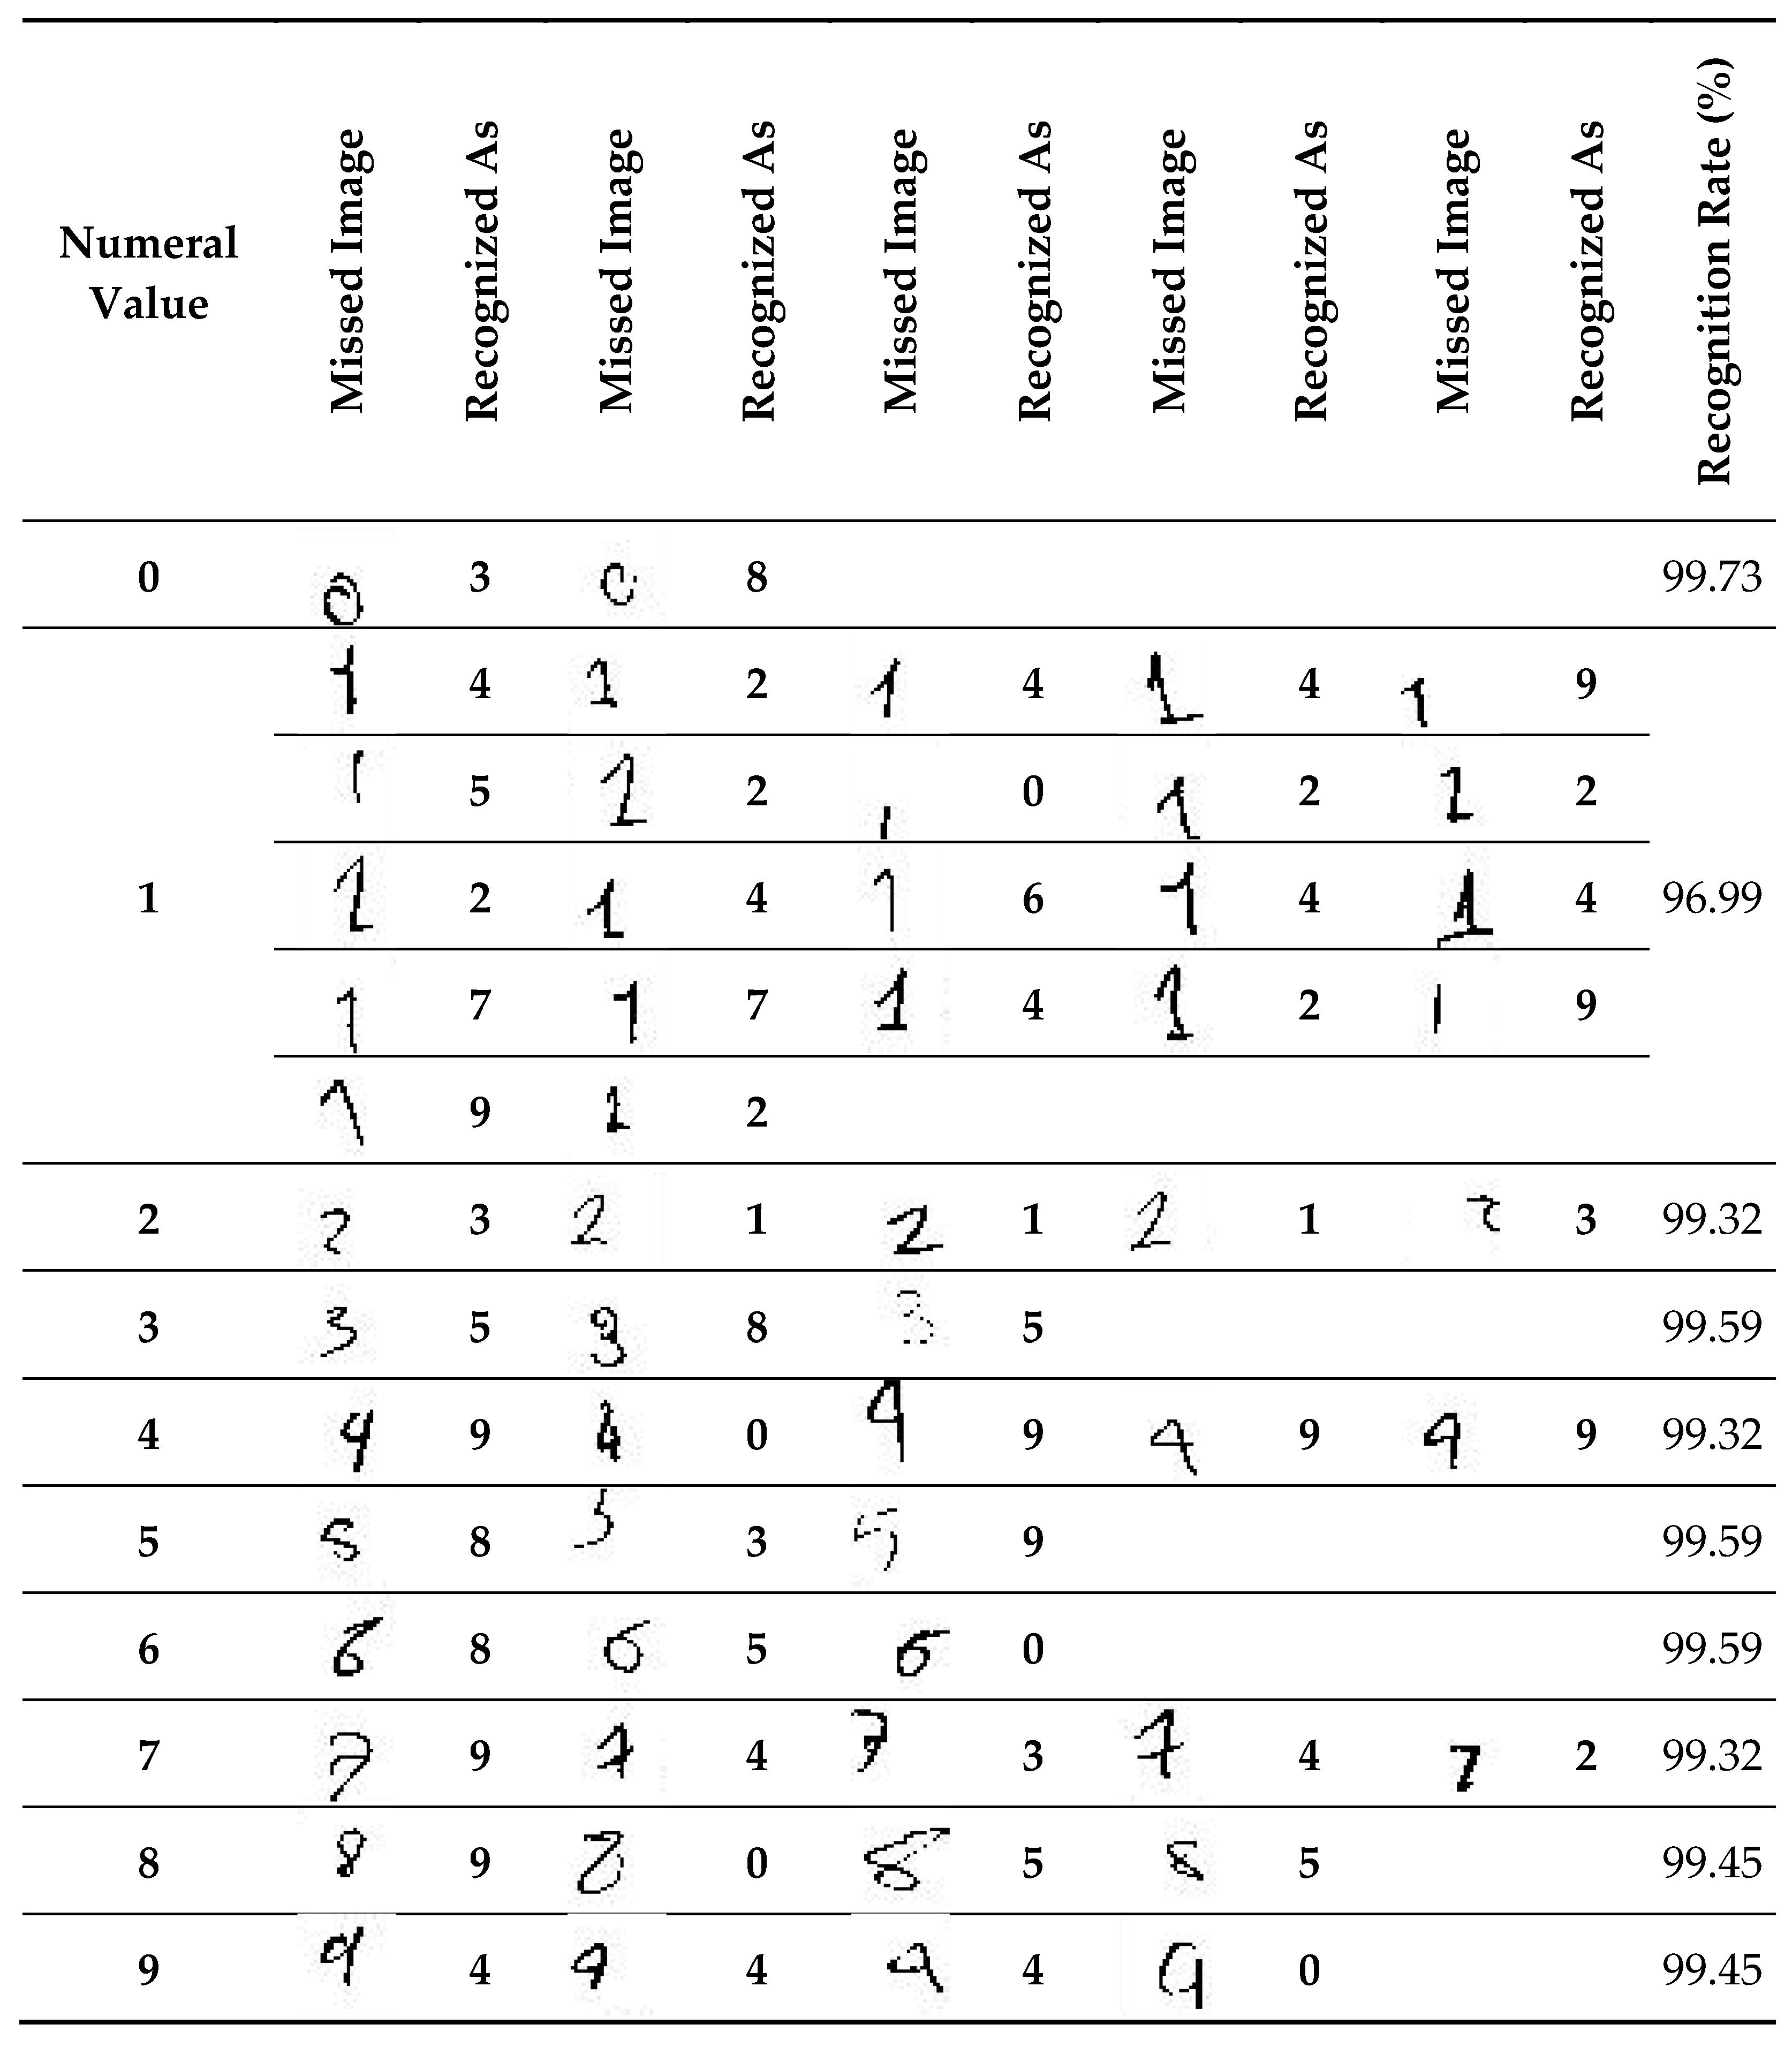 Applied Sciences Free Full Text Recognition Of Handwritten Arabic And Hindi Numerals Using Convolutional Neural Networks Html